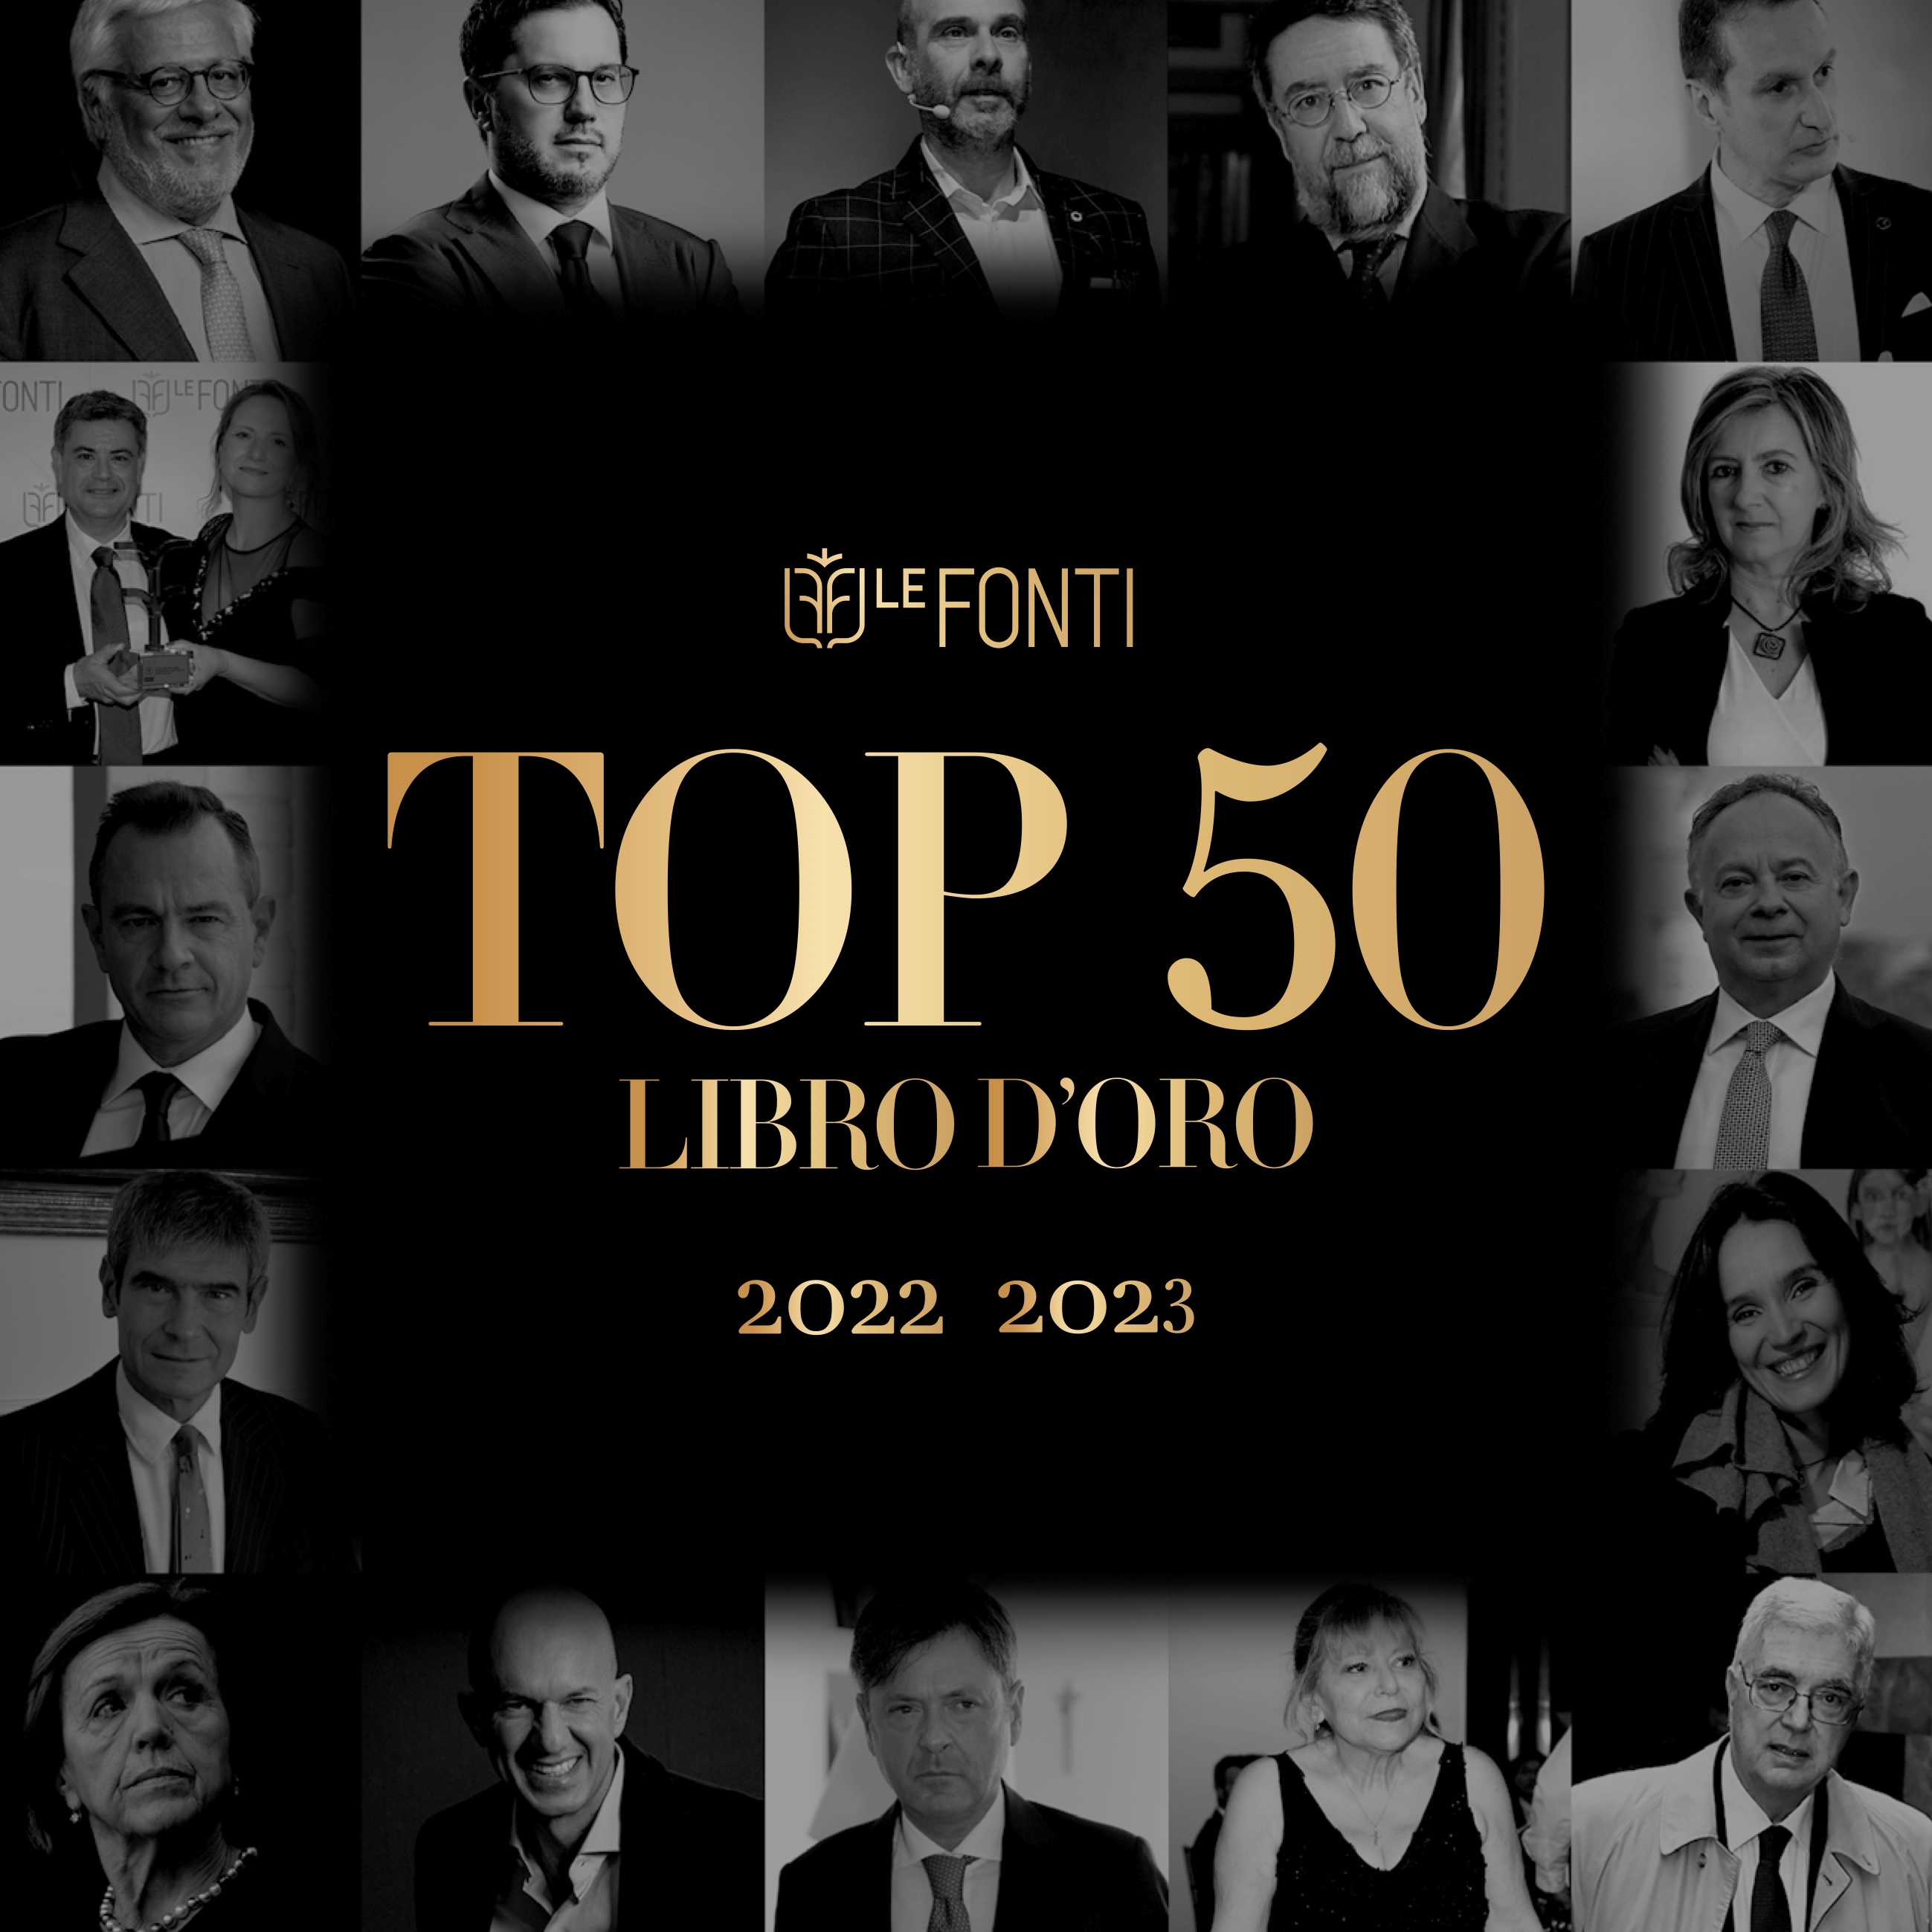 Lubea listed among the 50 Italian excellencies